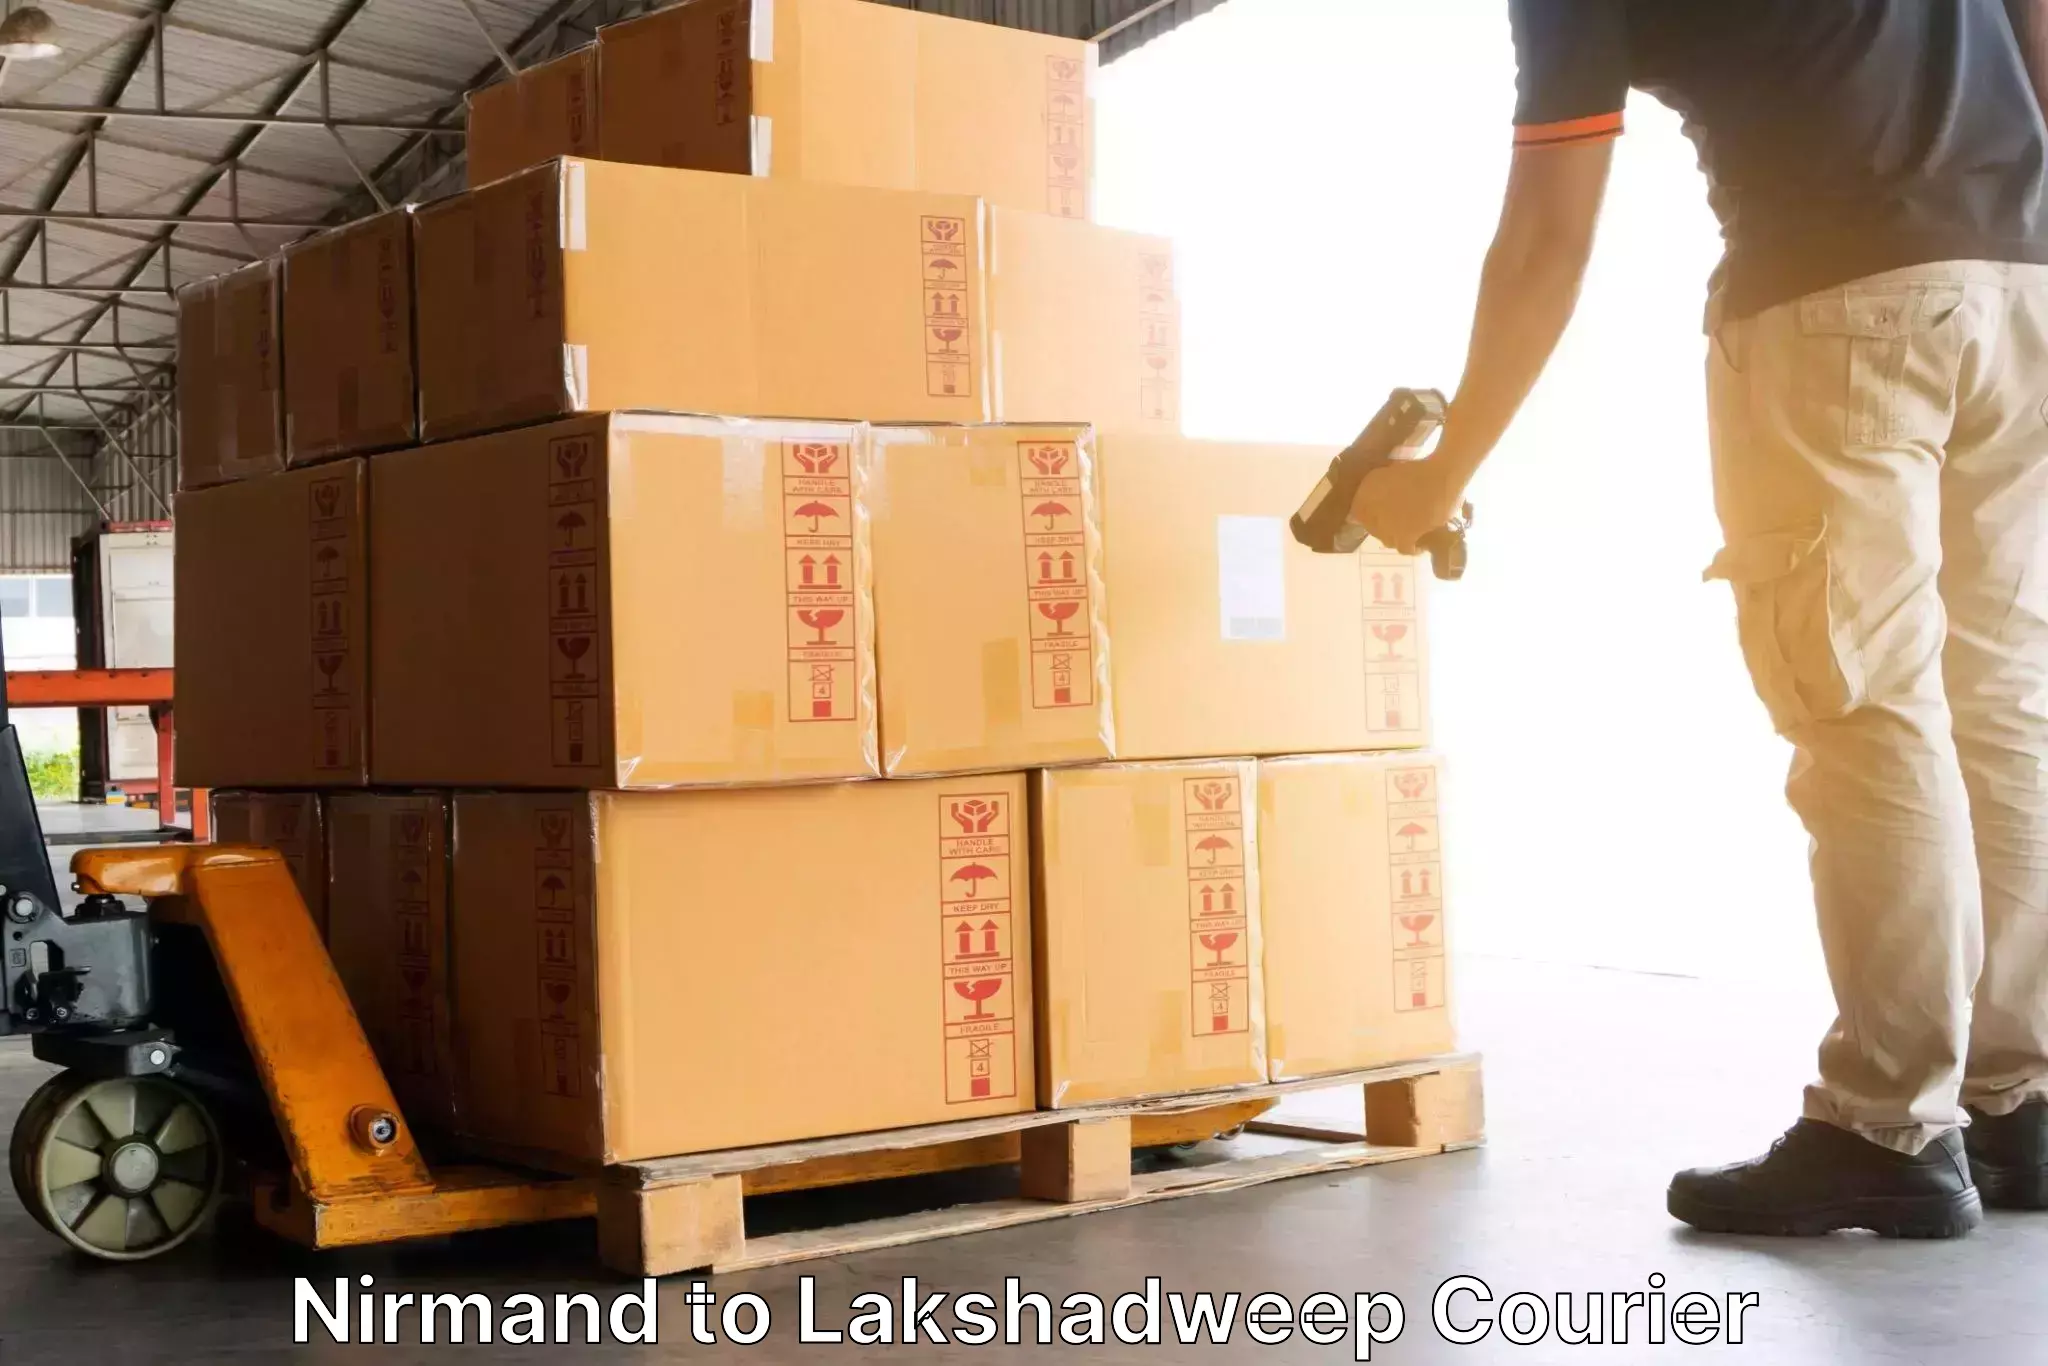 Express logistics service in Nirmand to Lakshadweep